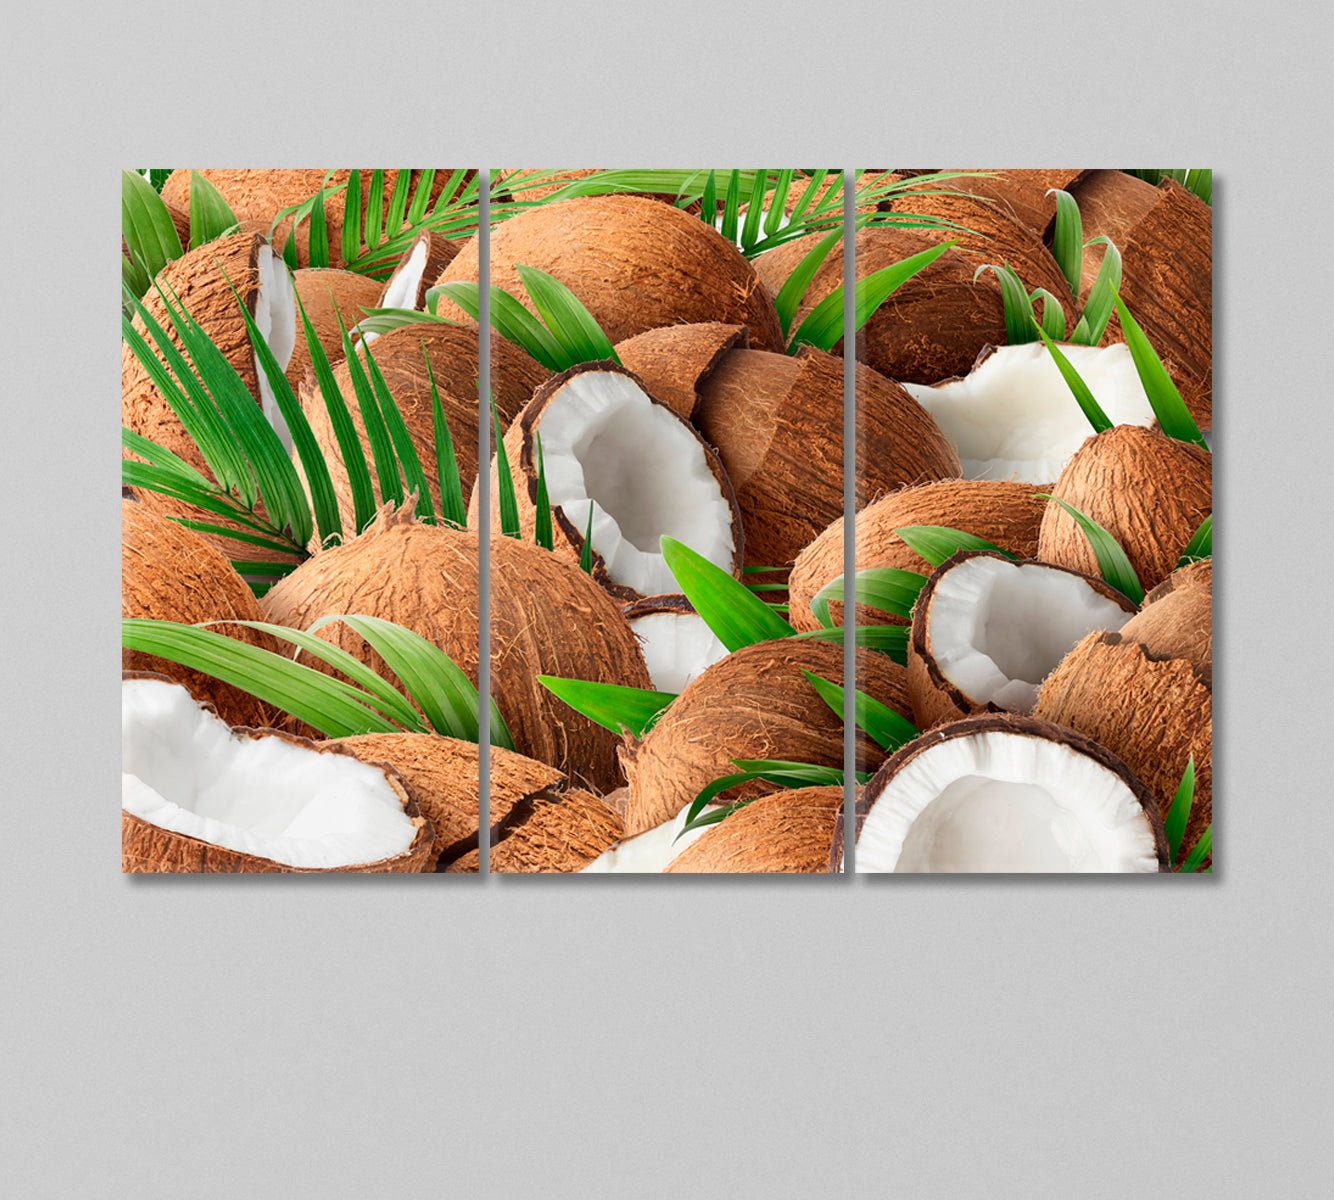 Chopped Coconuts with Palm Leaves Canvas Print-Canvas Print-CetArt-3 Panels-36x24 inches-CetArt